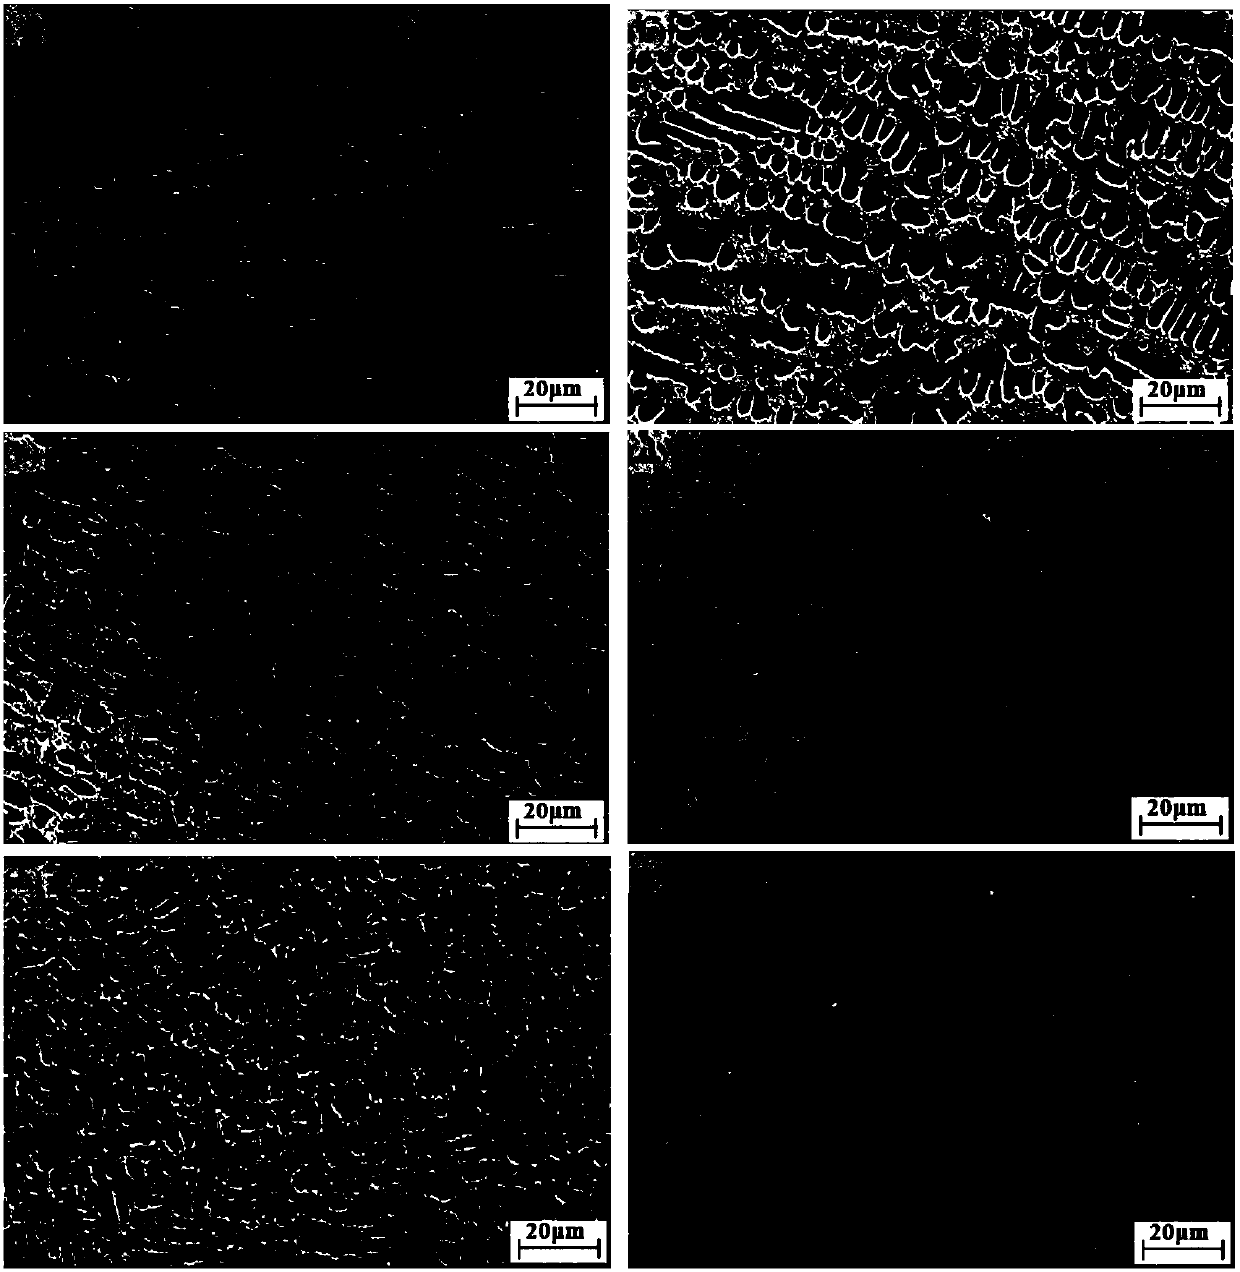 Electromagnetic Stirring Assisted Laser Rapid Forming of Nickel-based Alloy Parts